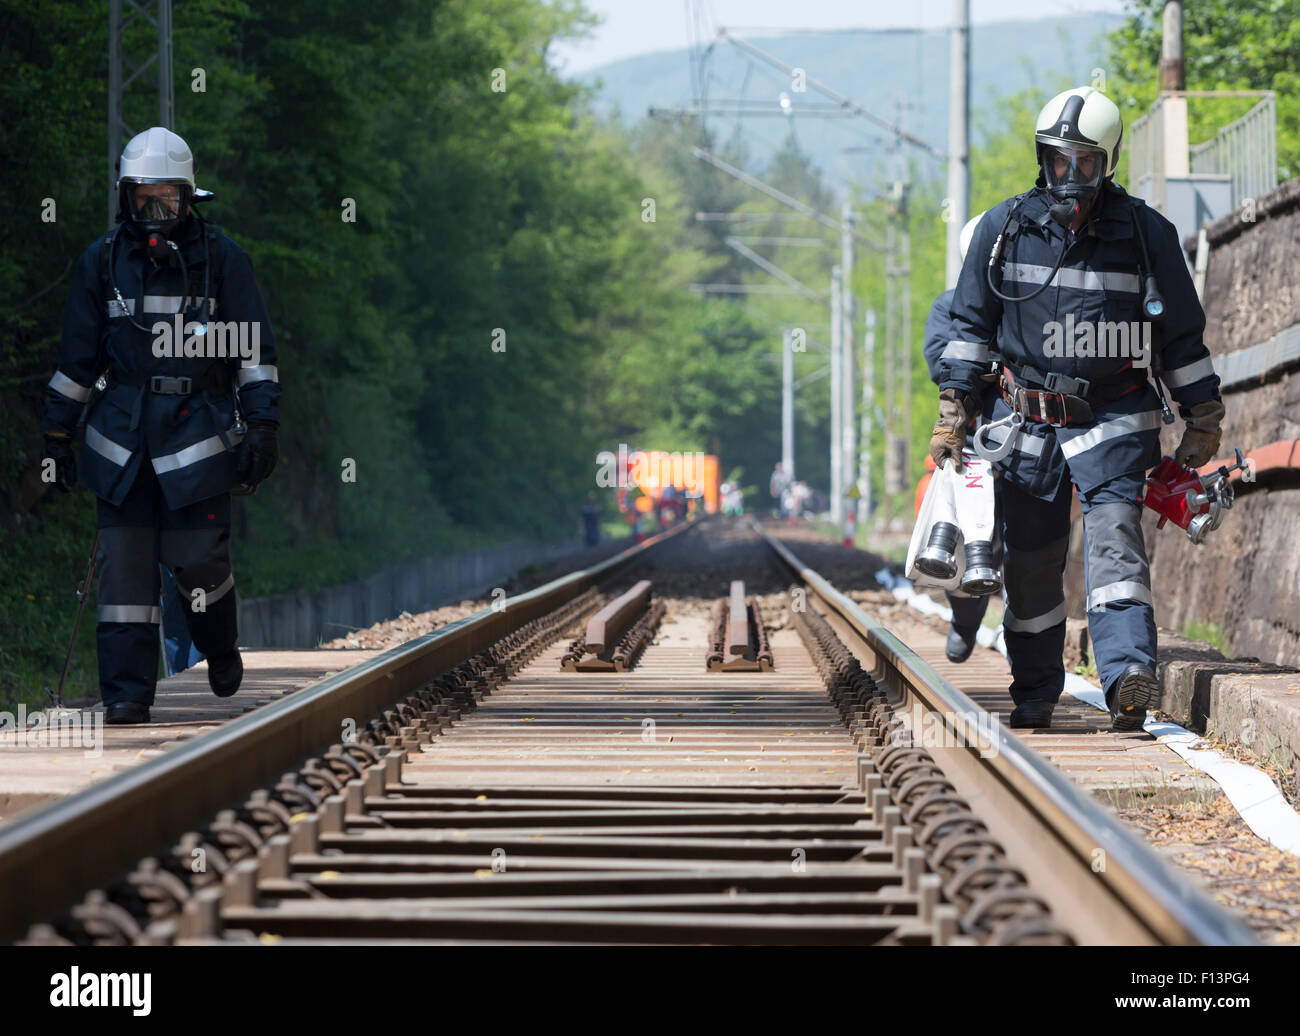 Sofia, Bulgaria - May 19, 2015: Firefighters are approaching a chemical cargo train crash near Sofia, Bulgaria. Teams from Fire  Stock Photo